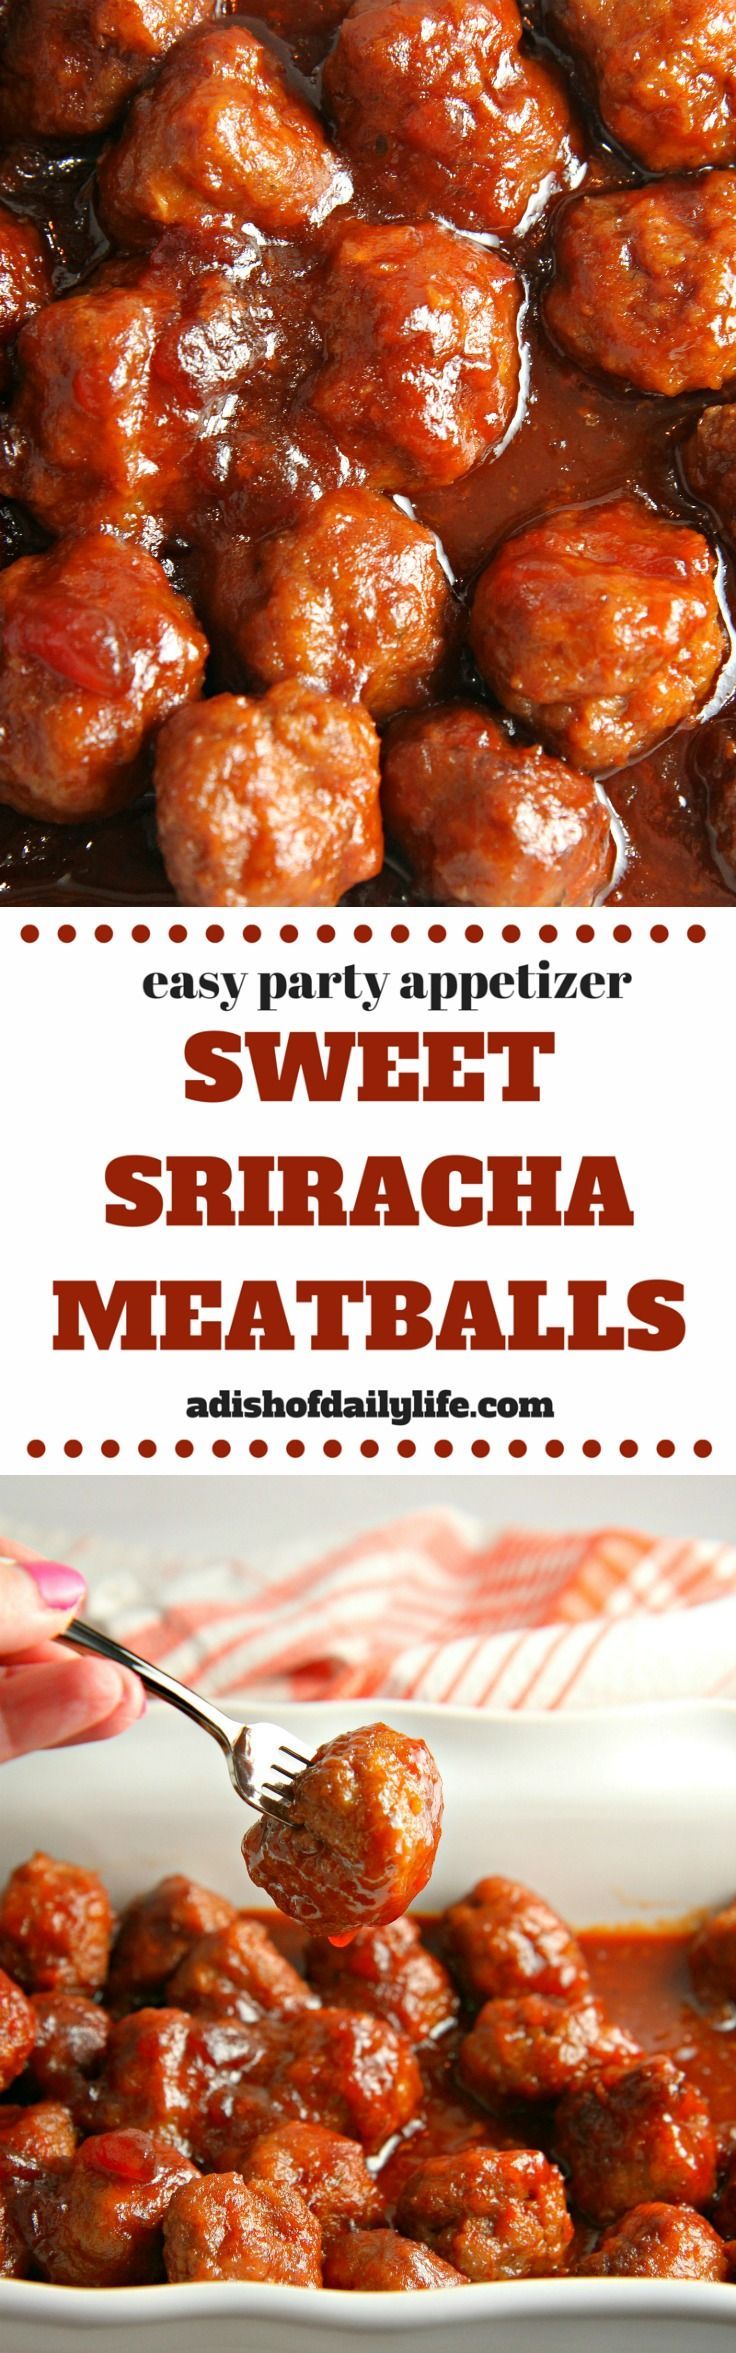 Looking for an easy meatball crockpot appetizer for game day? Sweet pairs with spicy in this Sweet Sriracha Meatballs recipe…the